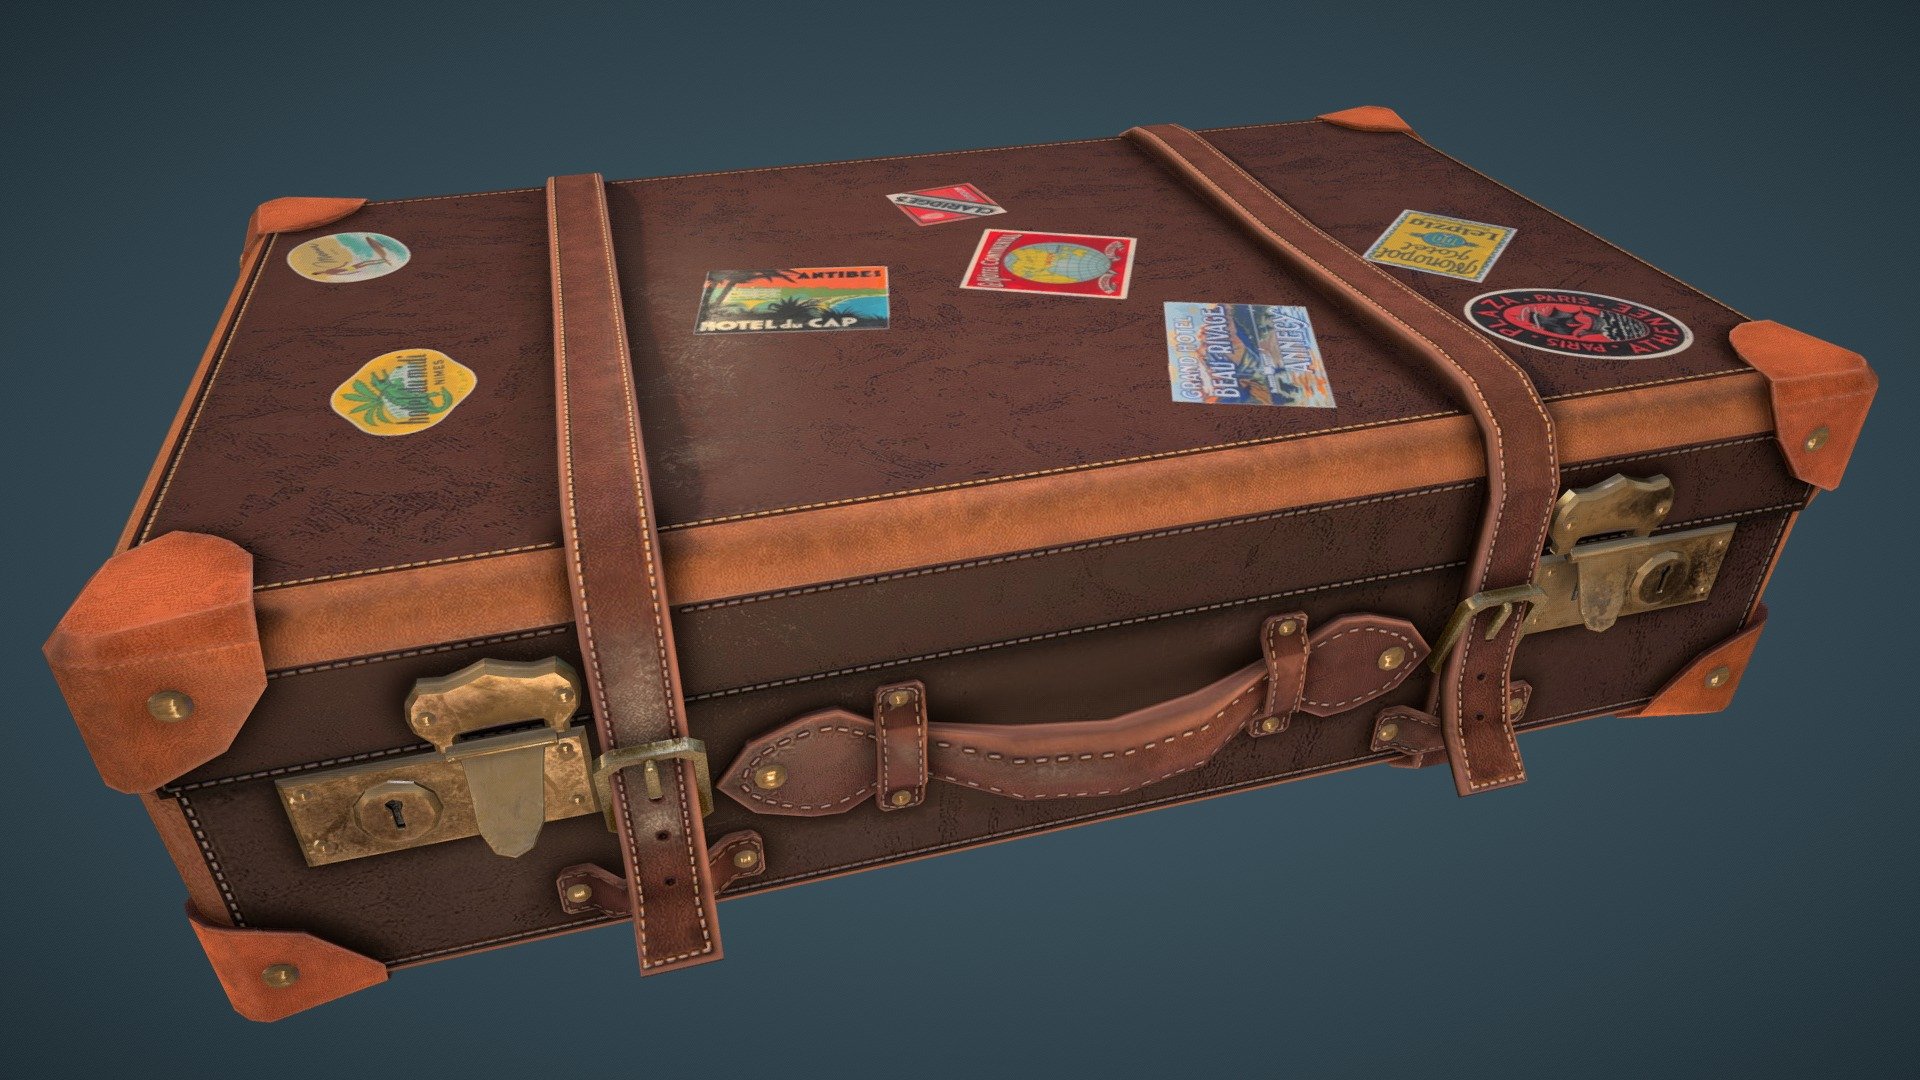 A one-day model made with autodesk maya, substance painter and krita 3d model